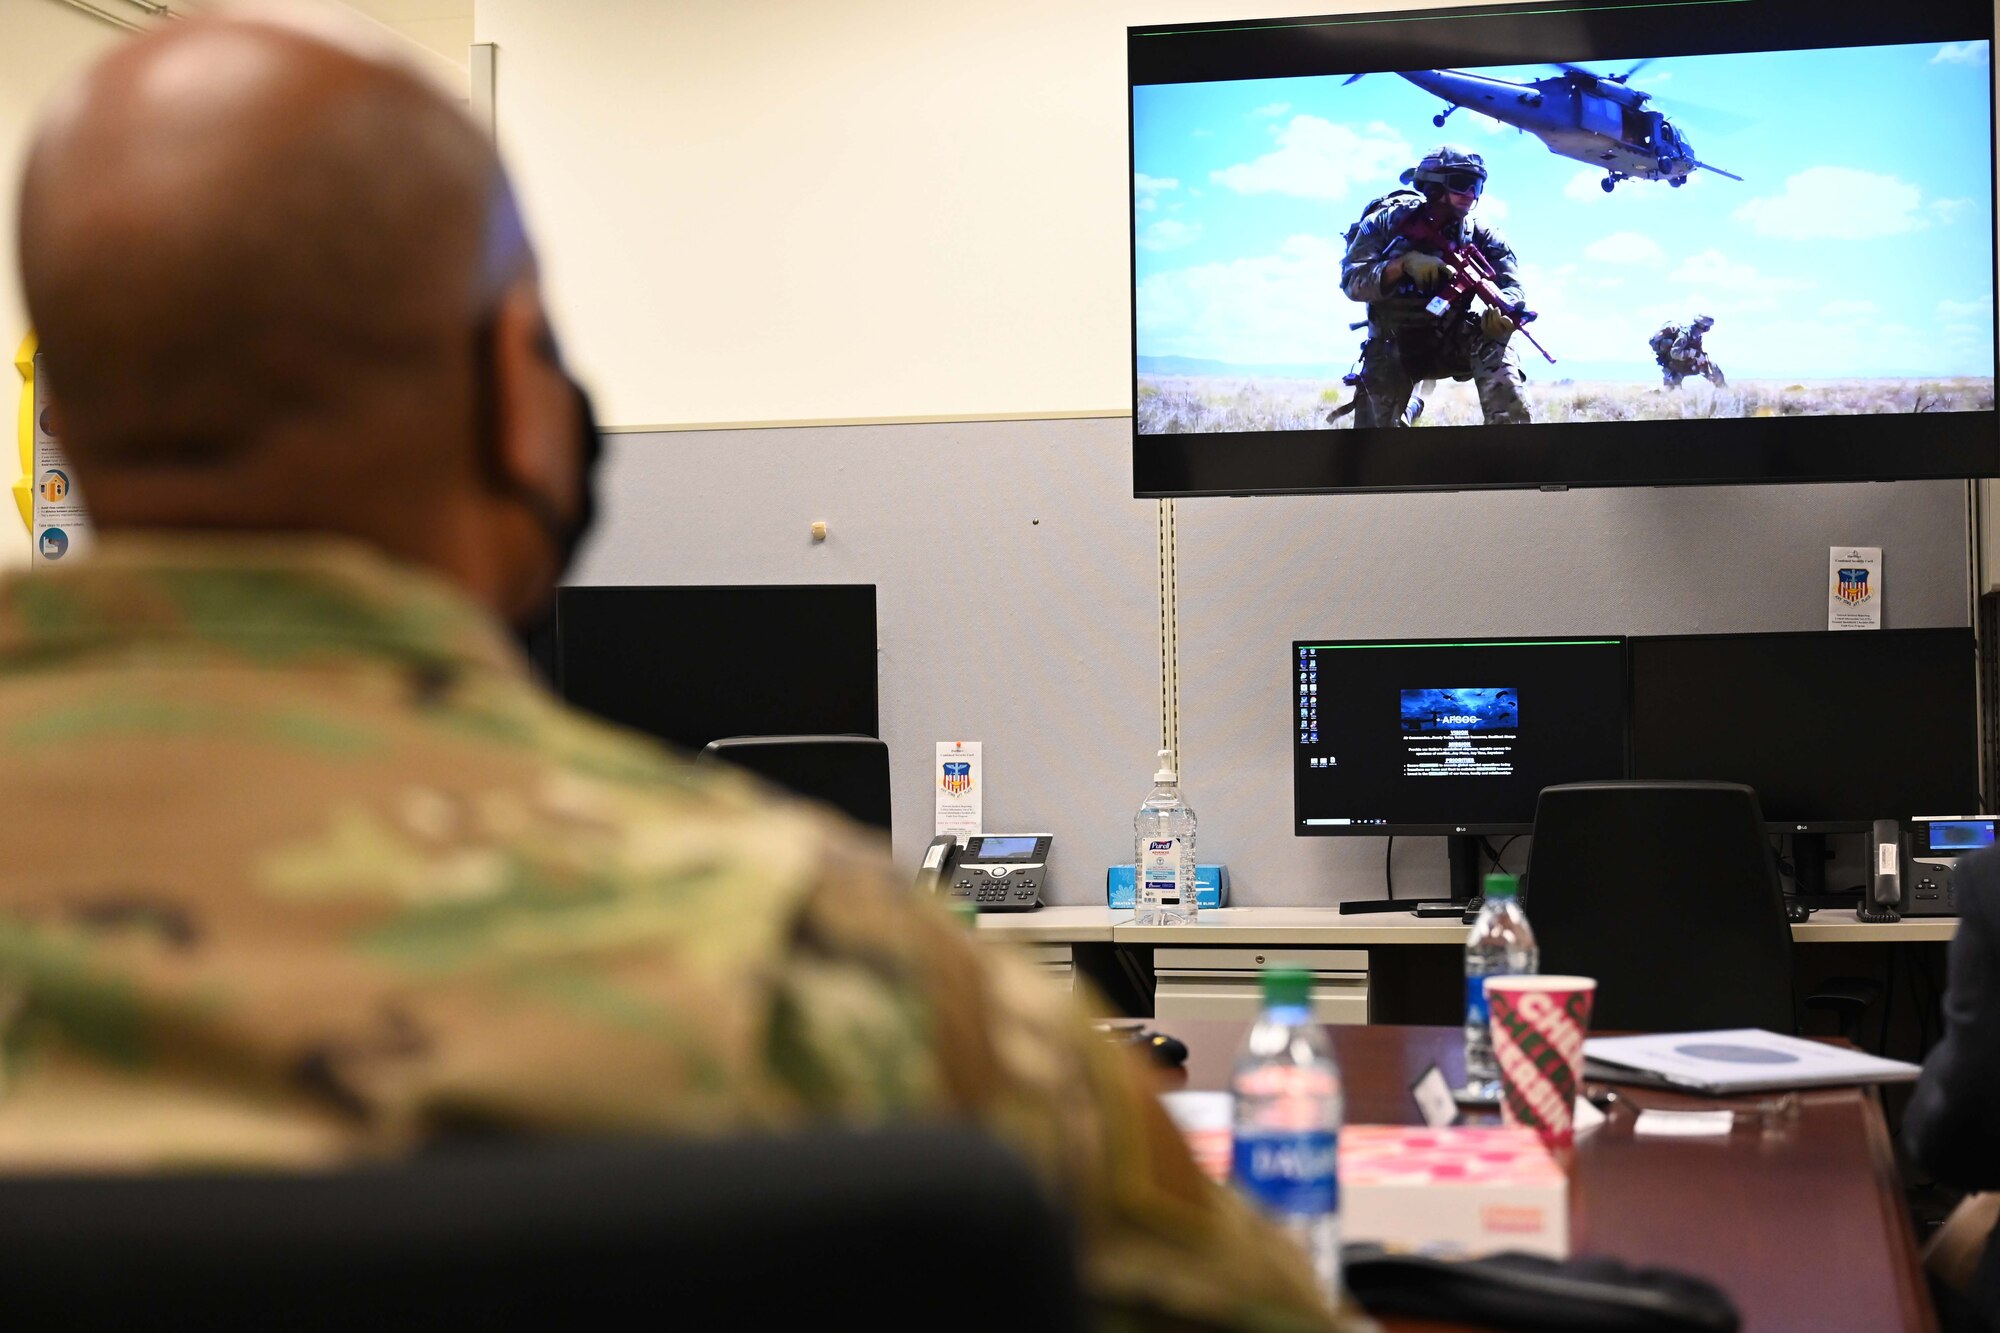 Brigadier General Roy Collins, director of Security Forces, deputy chief of staff for Logistics, Engineering and Force Protection, watches a Deployed Aircraft Ground Response Element (DAGRE) introduction video during his visit to Hurlburt Field, Fla., Jan. 11, 2021. Collins was joined by Chief Master Sgt. Brian Lewis, Security Forces career field manager, and they toured the 371th Special Operations Combat Training Squadron which included a lasershot demonstration, a Deployed Aircraft Ground Response Element (DAGRE) training brief, and  a tour of the 23rd Special Tactics Squadron’s facilities. (U.S. Air Force photo by Senior Airman Brandon Esau)